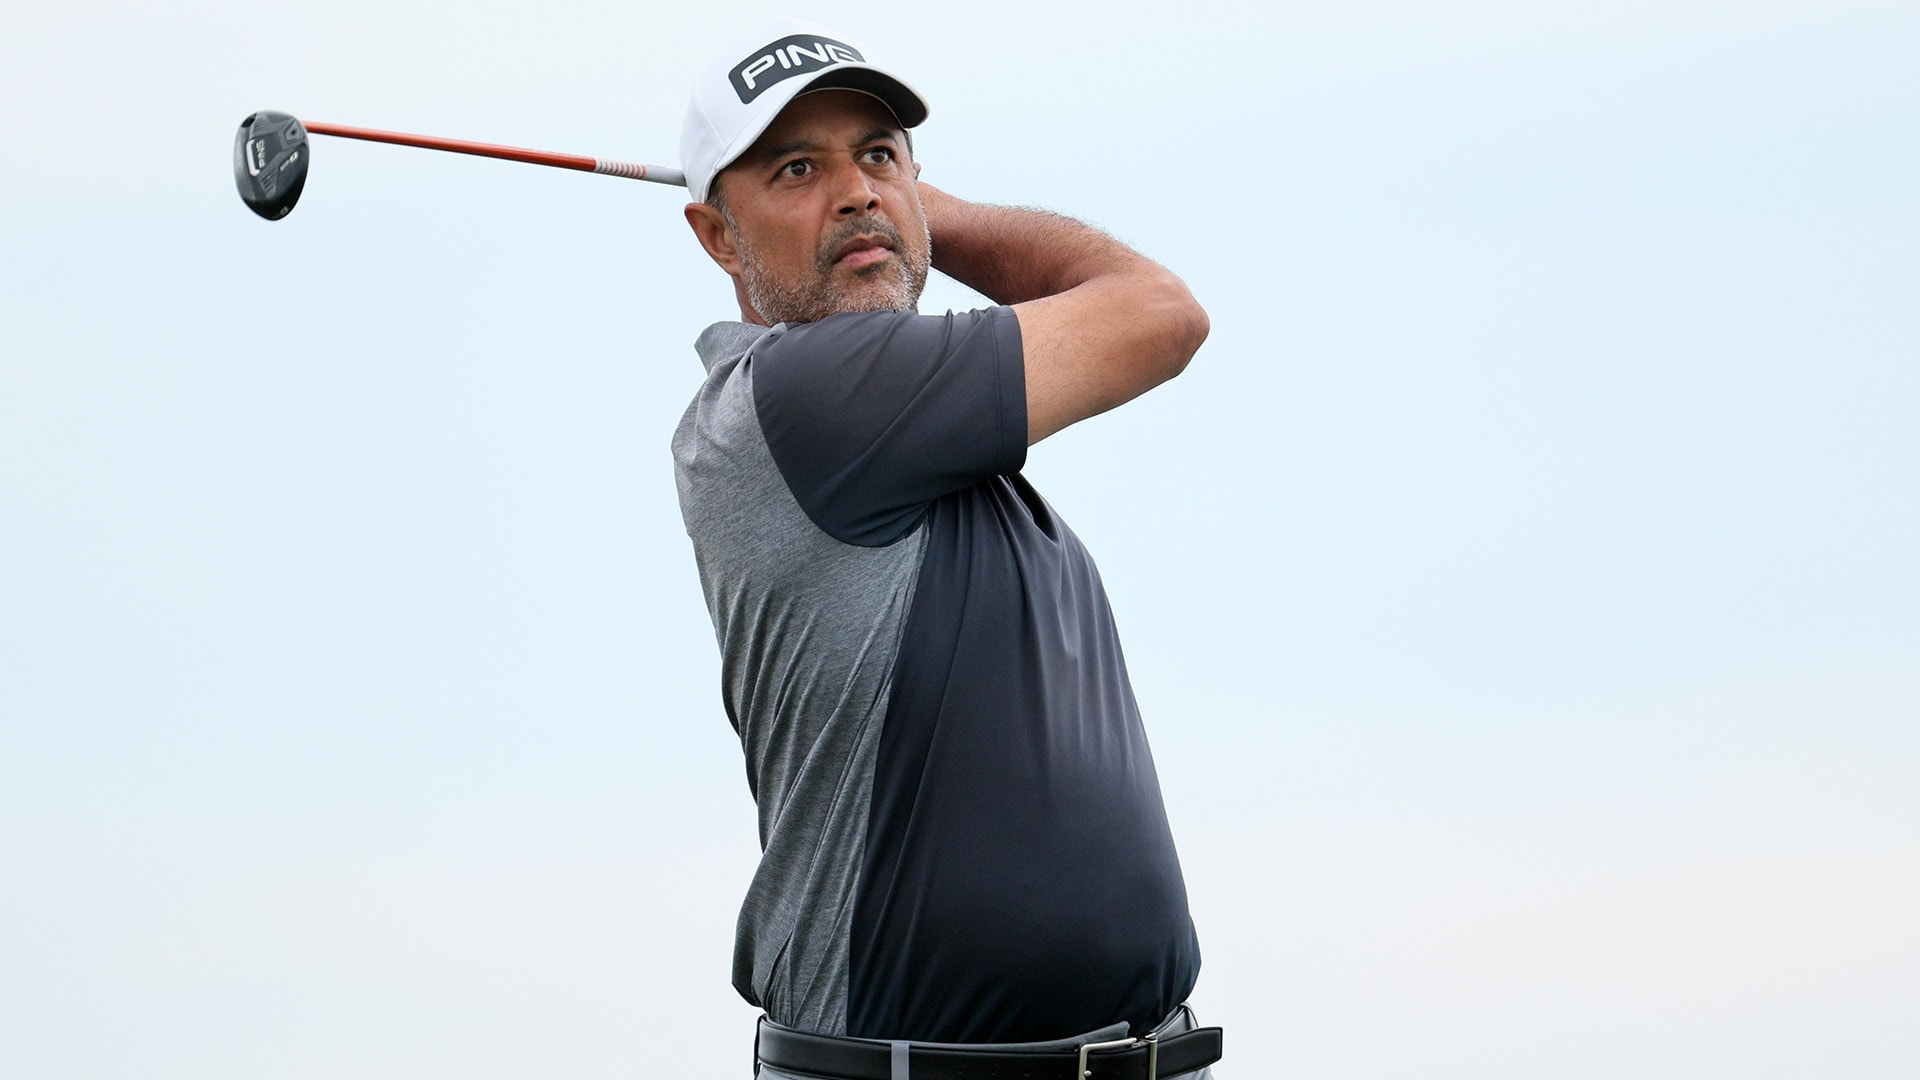 Arjun Atwal barely gets in the field, opens with 63 in first round since father’s passing